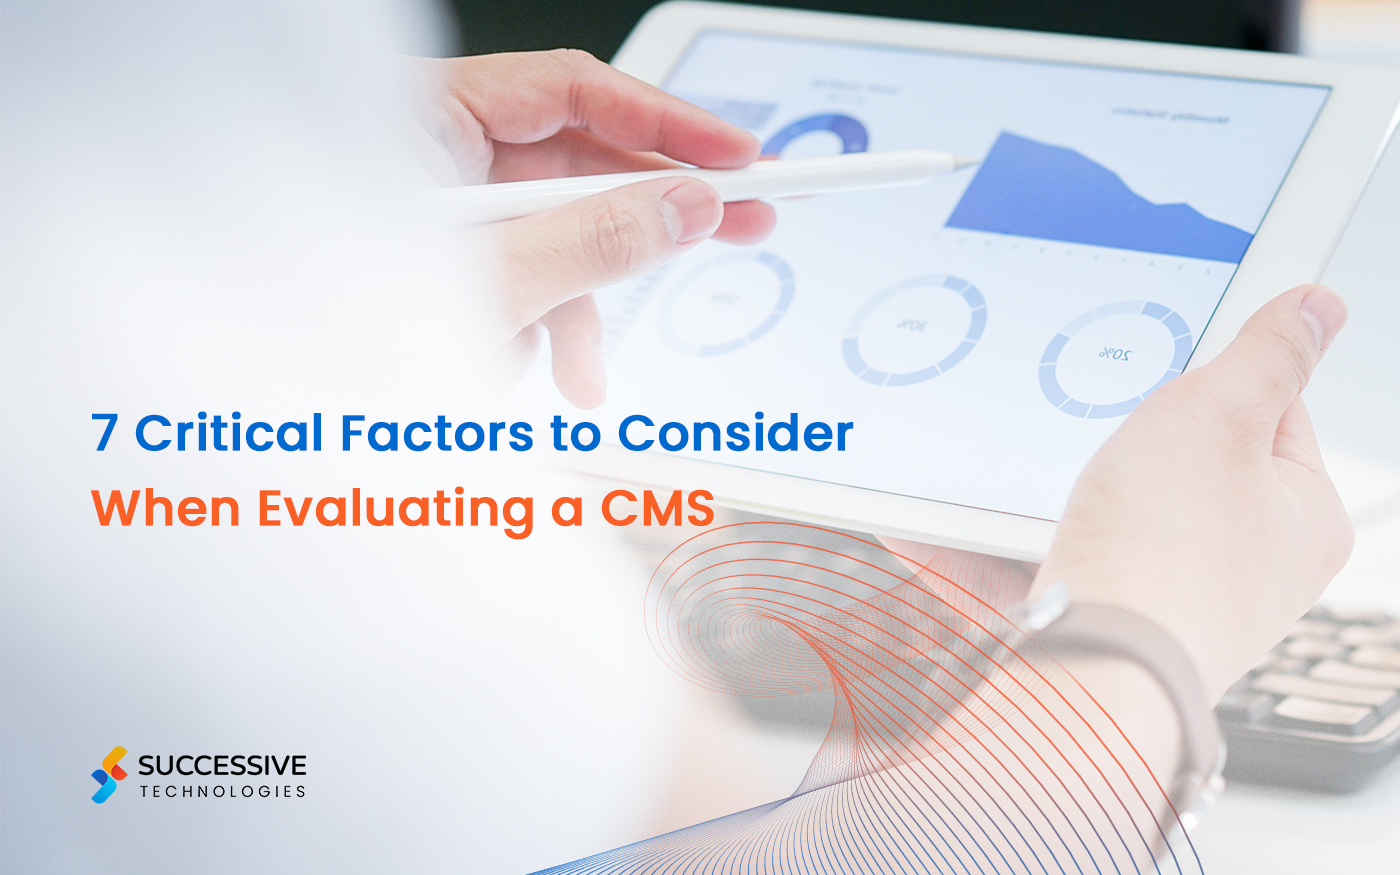 7 Critical Factors to Consider When Evaluating a CMS